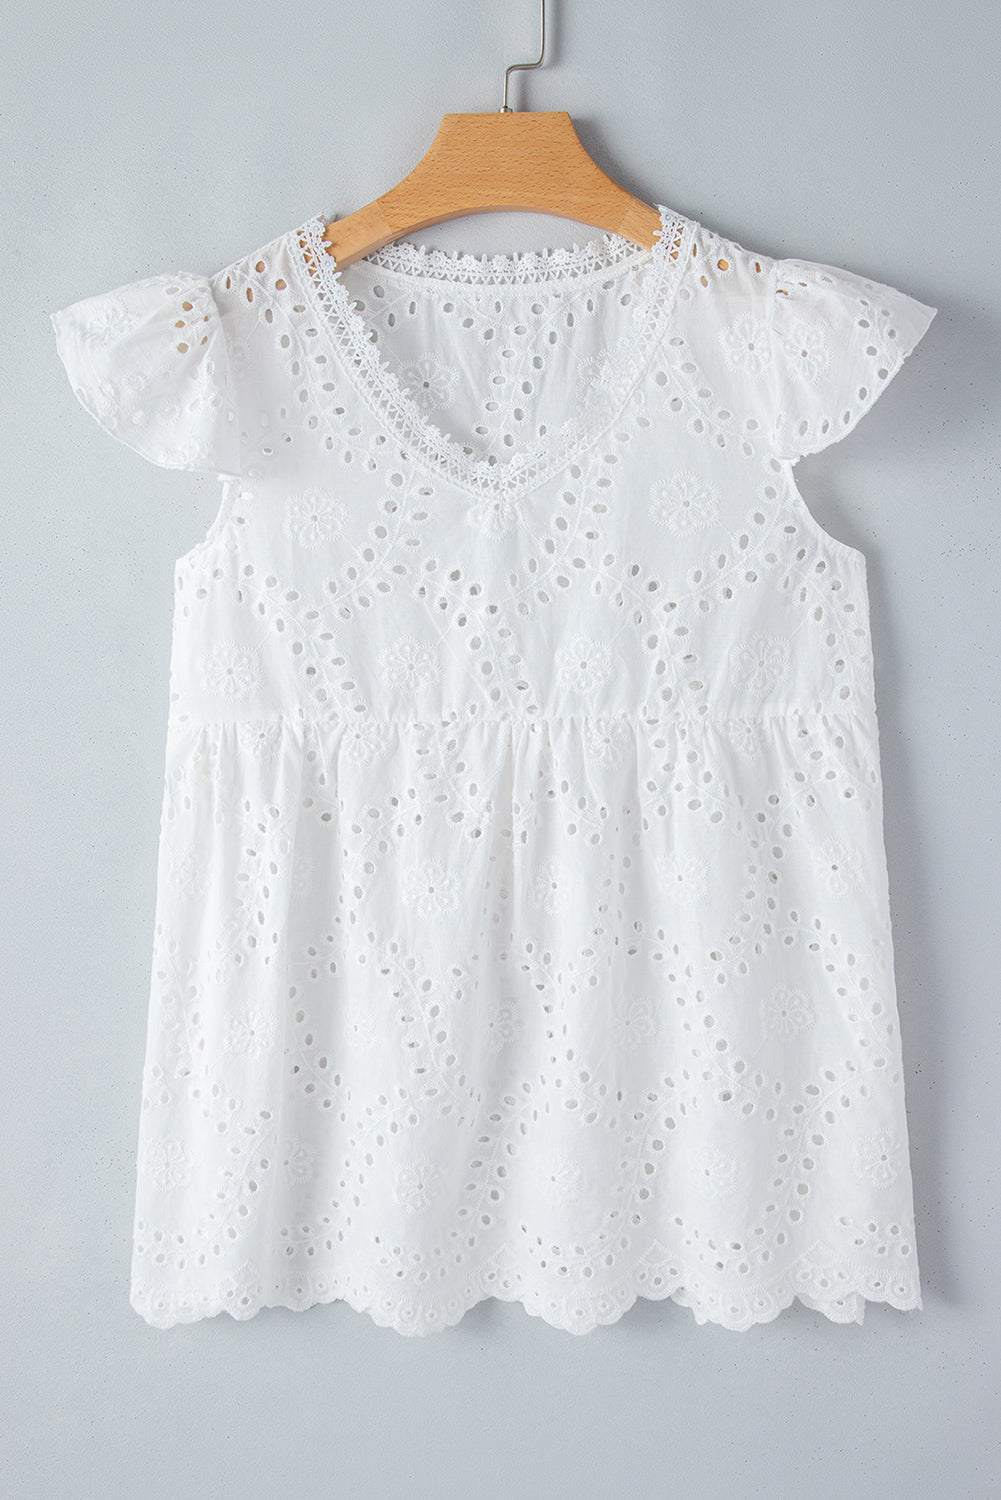 - White V Neck Ruffled Embroidered Sleeveless Top - women's blouse at TFC&H Co.